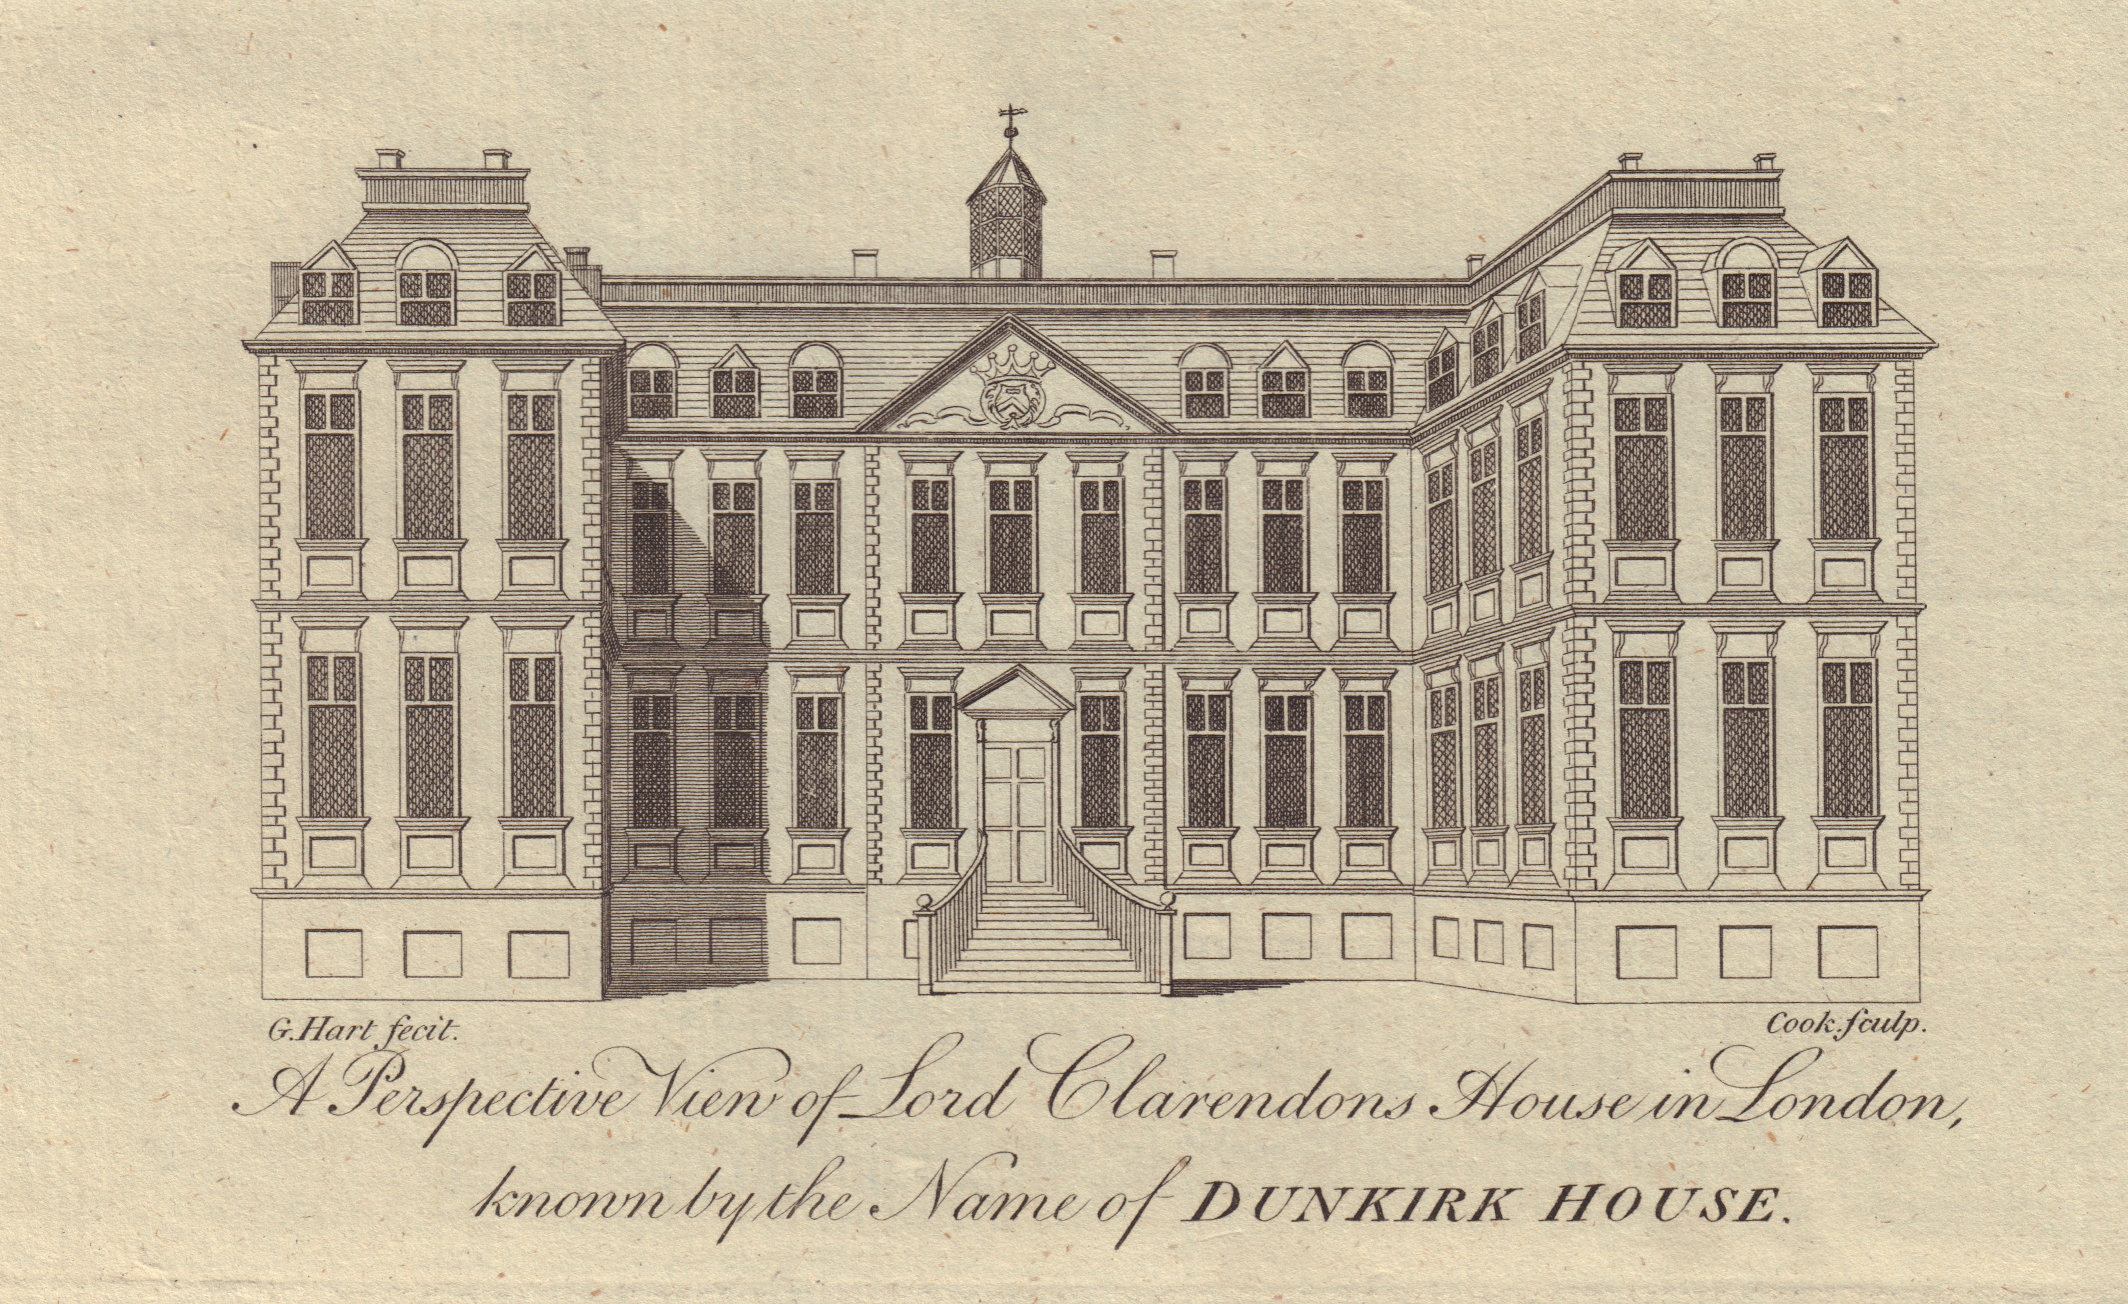 Associate Product Lord Clarendon's House in London, Dunkirk House. GENTS MAG 1789 old print